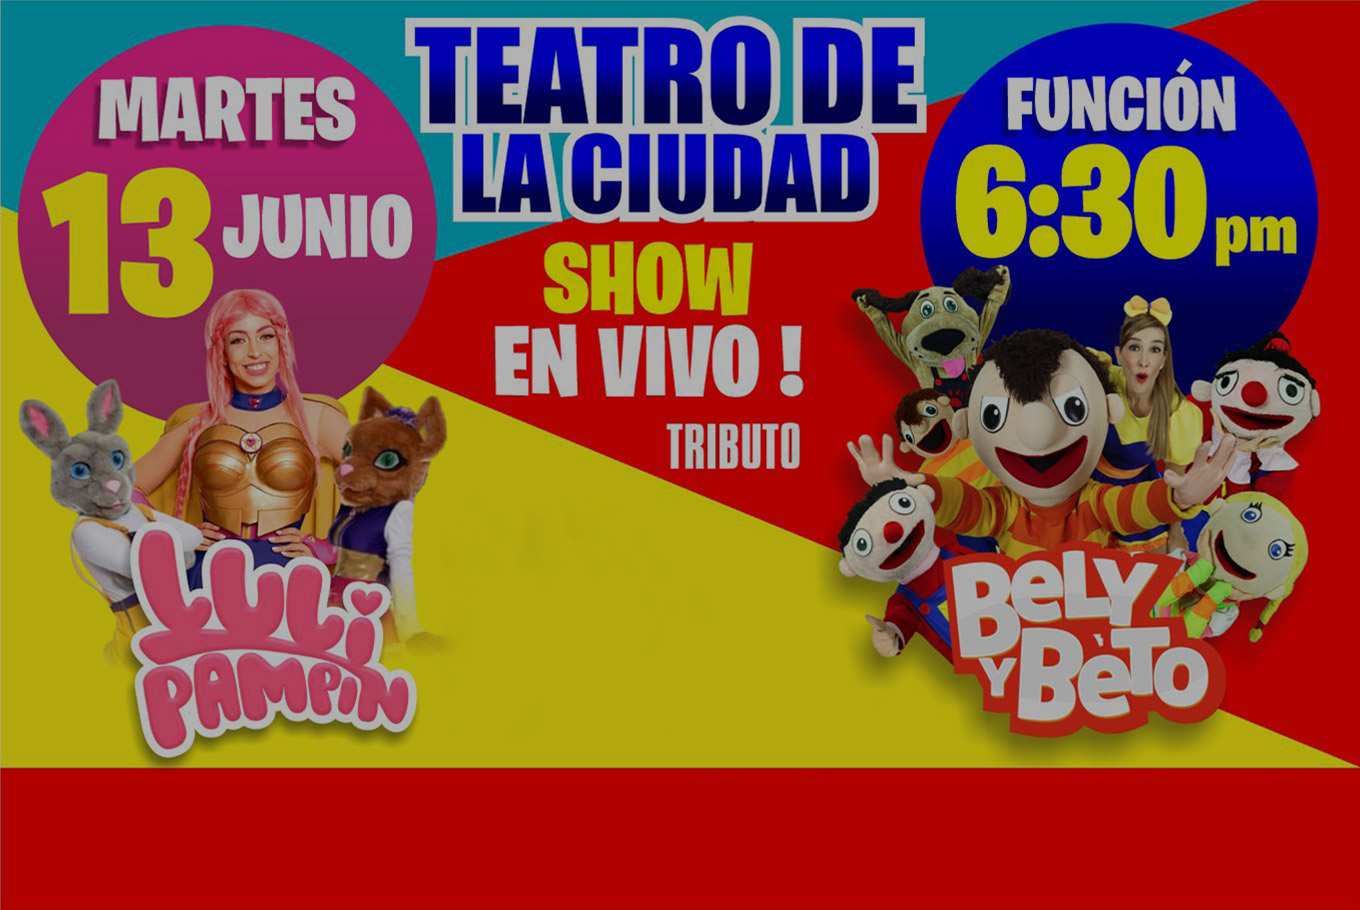 Luli Pampin And Bely Y Beto Tributo Ticketpoint 4499